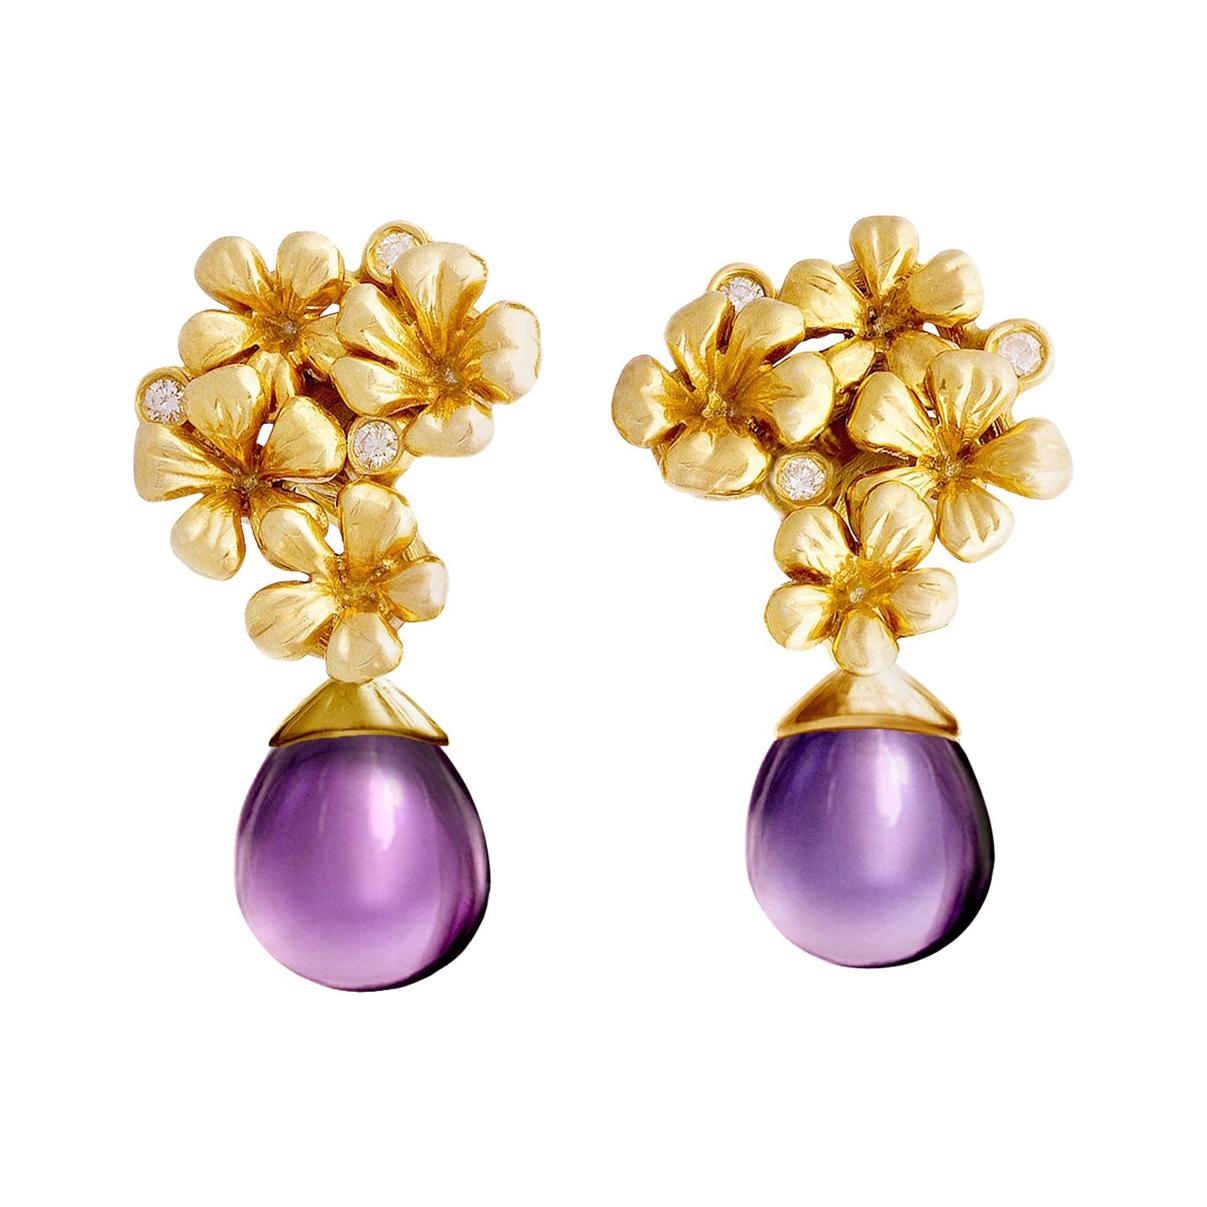 18 Karat Gold Plum Flowers Contemporary Earrings with Diamonds and Amethyst